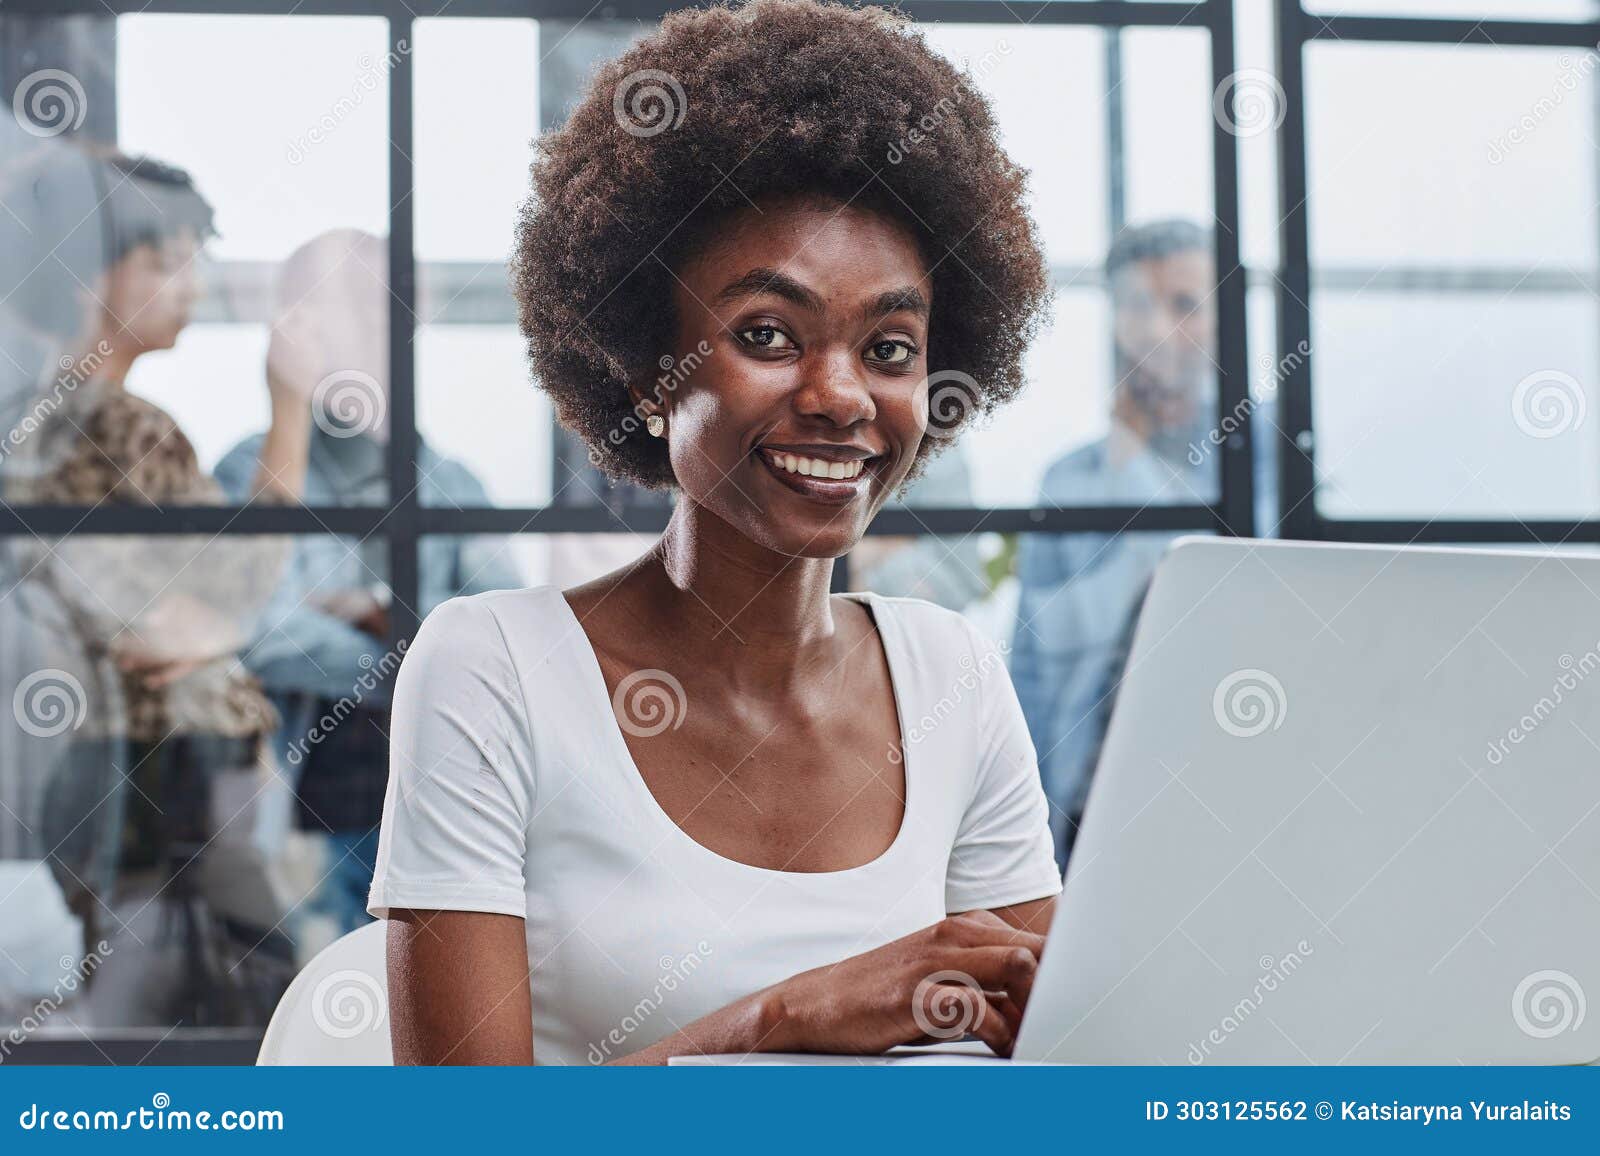 business woman with her staff in background at office